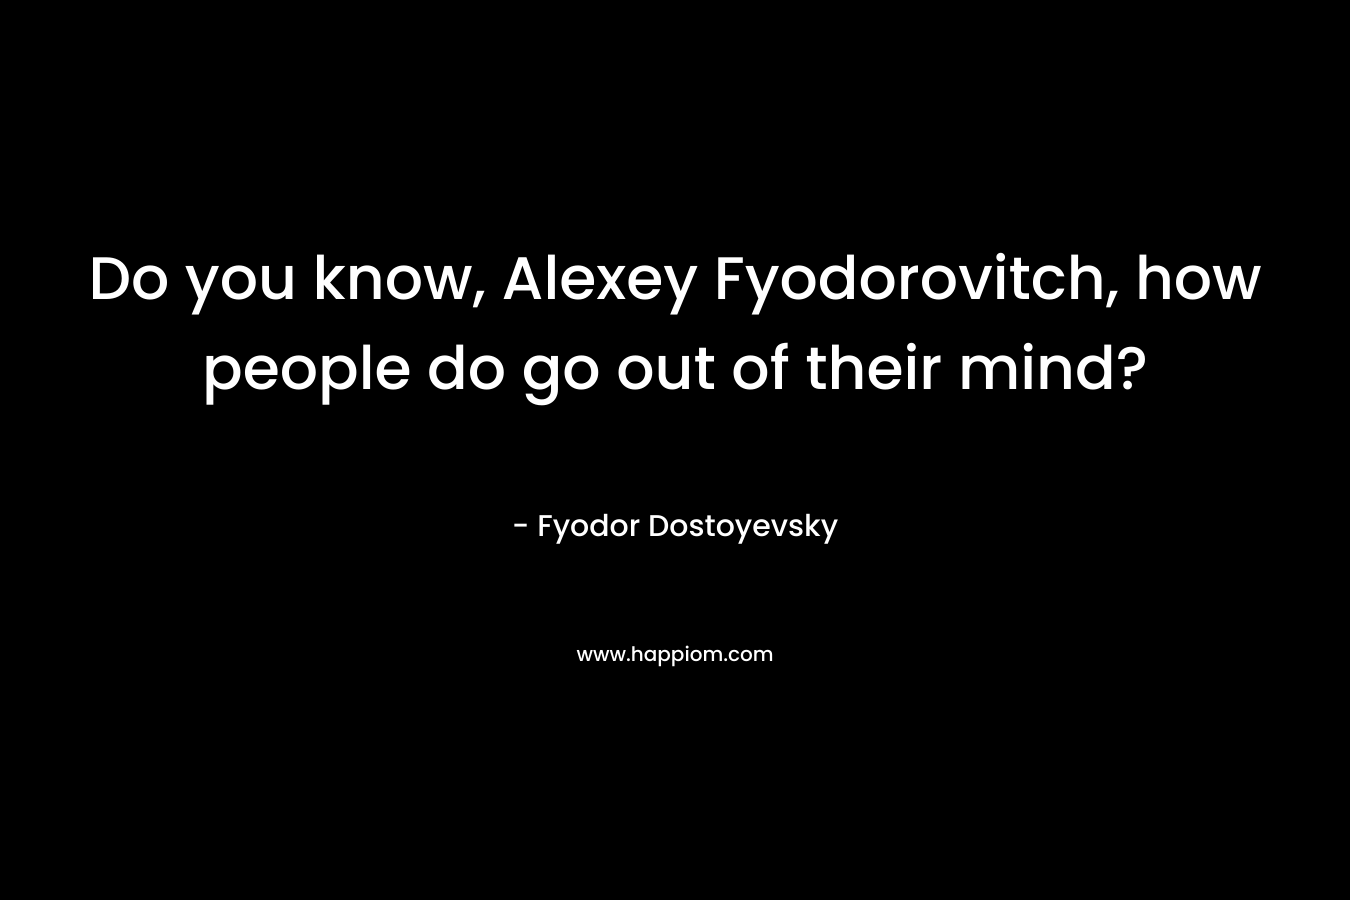 Do you know, Alexey Fyodorovitch, how people do go out of their mind?